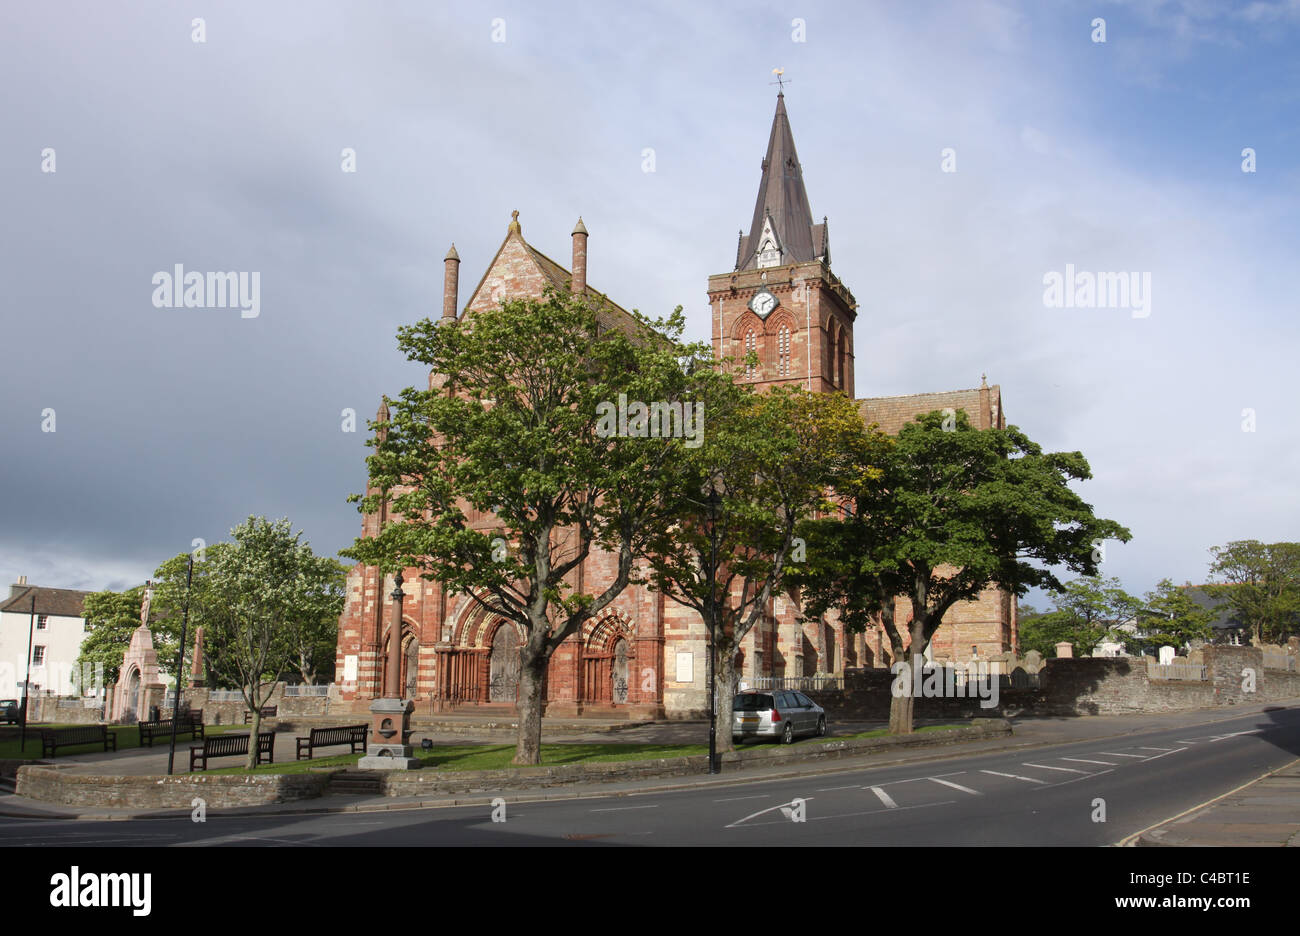 St Magnus Cathedral Kirkwall Orkney Scotland May 2011 Stock Photo